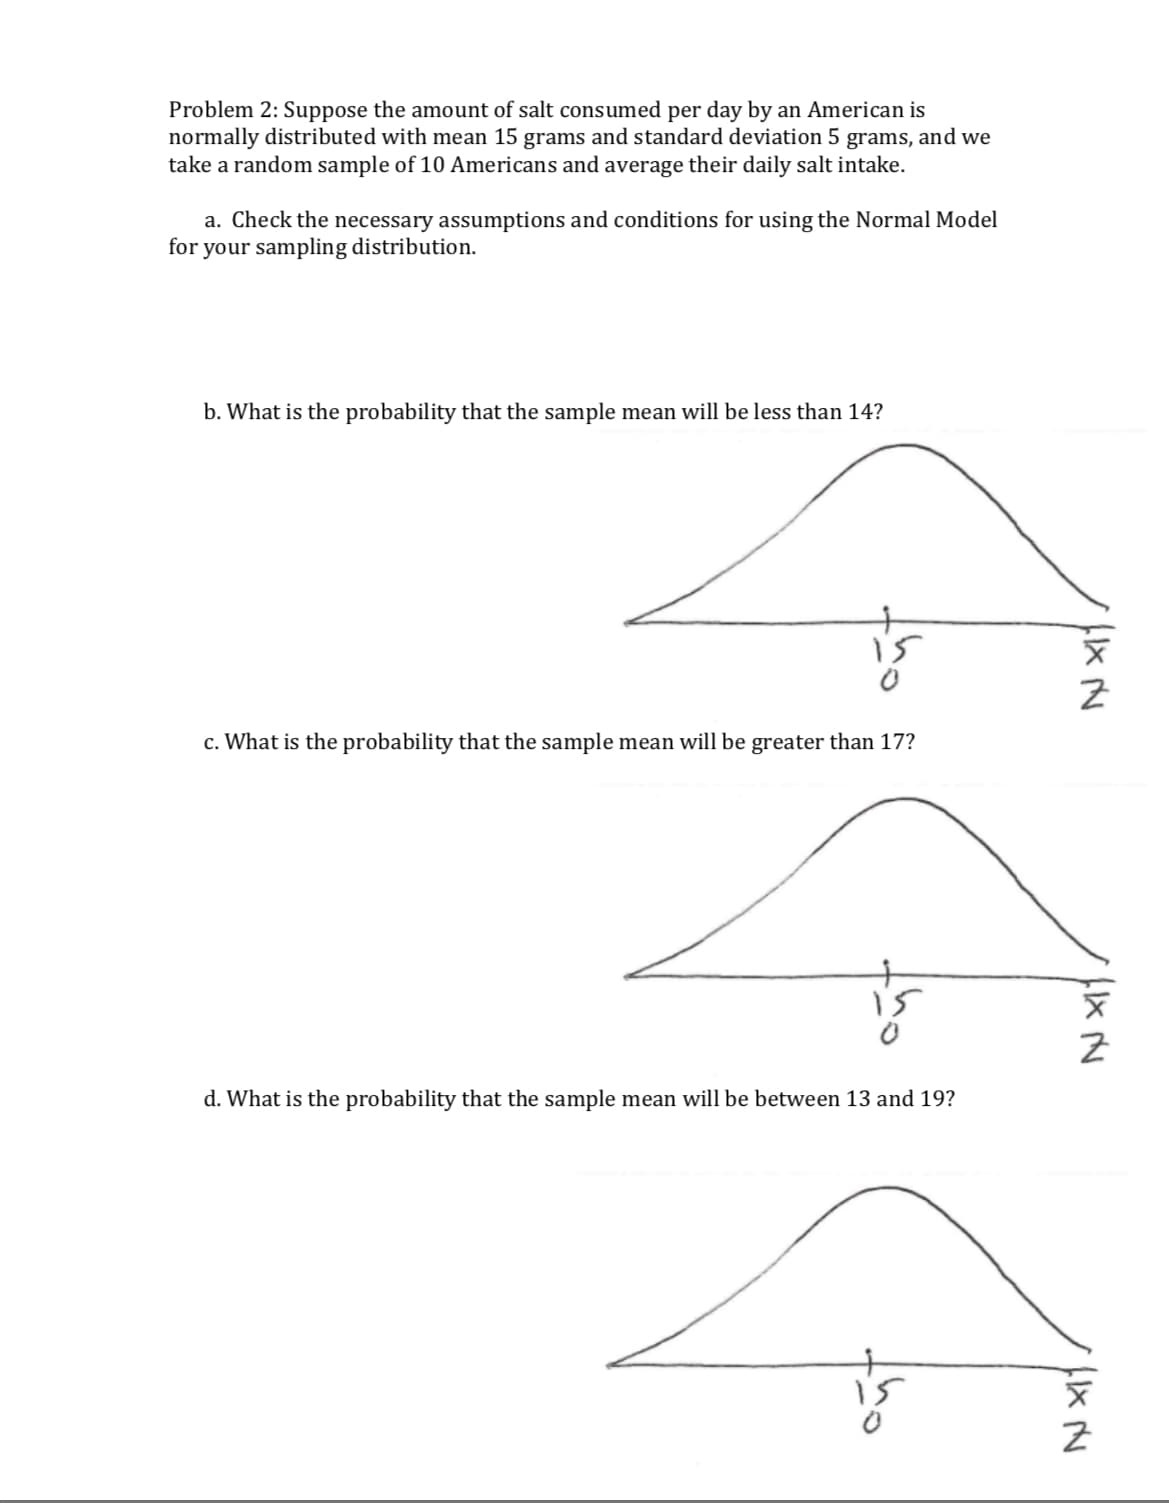 Problem 2: Suppose the amount of salt consumed per day by an American is
normally distributed with mean 15 grams and standard deviation 5 grams, and we
take a random sample of 10 Americans and average their daily salt intake.
a. Check the necessary assumptions and conditions for using the Normal Model
for your sampling distribution.
b. What is the probability that the sample mean will be less than 14?
0
2
c. What is the probability that the sample mean will be greater than 17?
0
2
d. What is the probability that the sample mean will be between 13 and 19?
0
2
